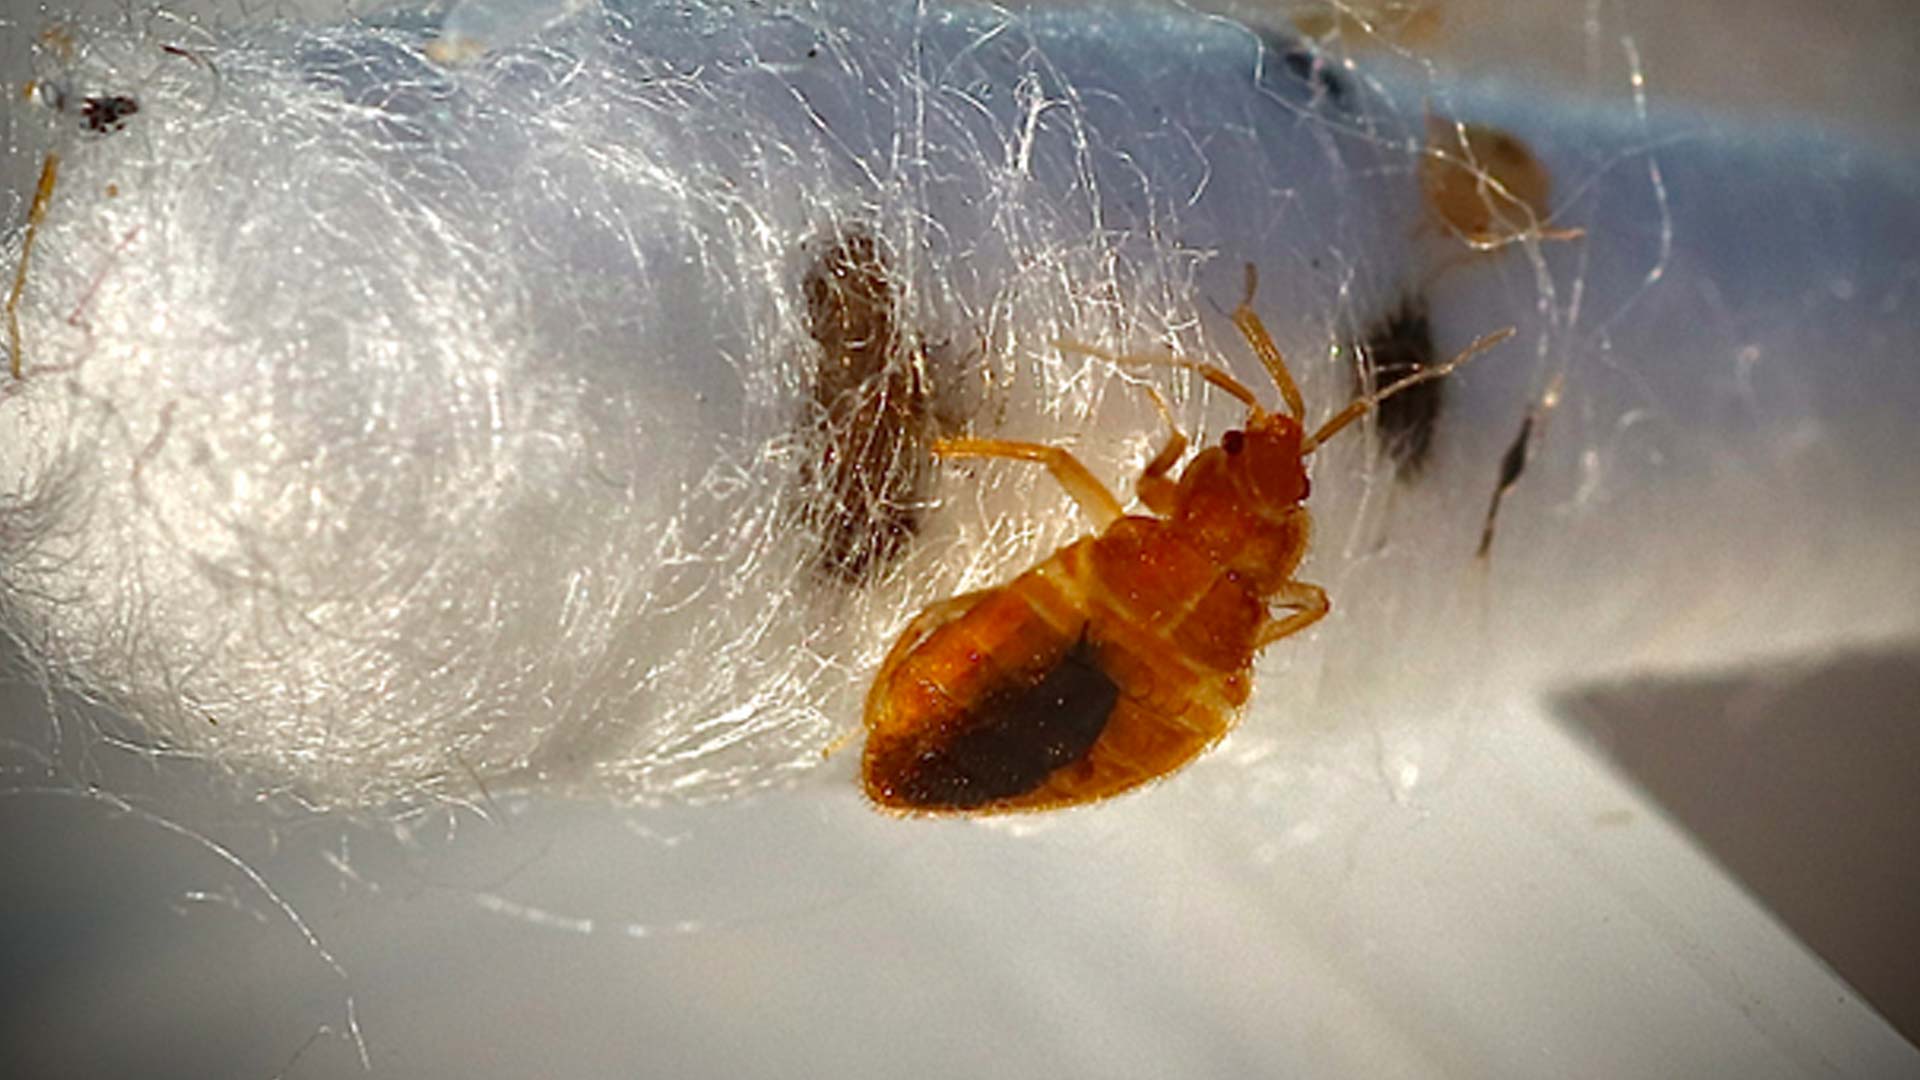 The Unseen Threat: Understanding the Visibility of Bed Bugs in Our Homes